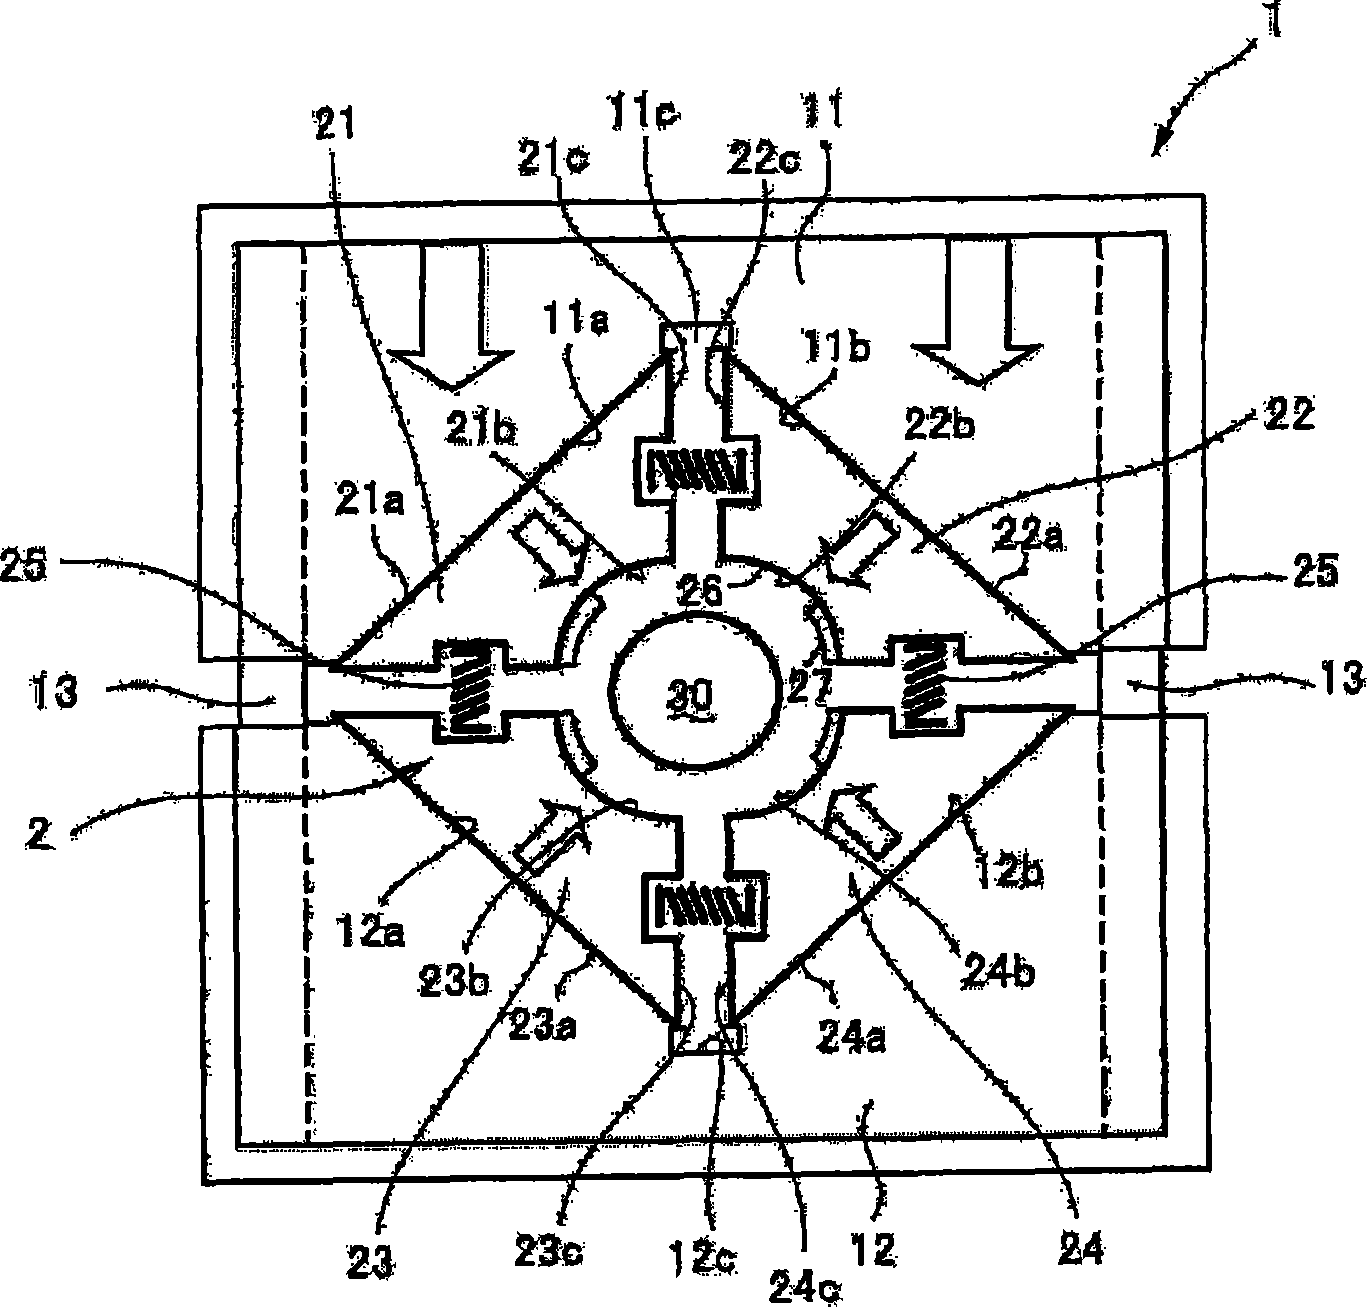 Apparatus for forming pipe material